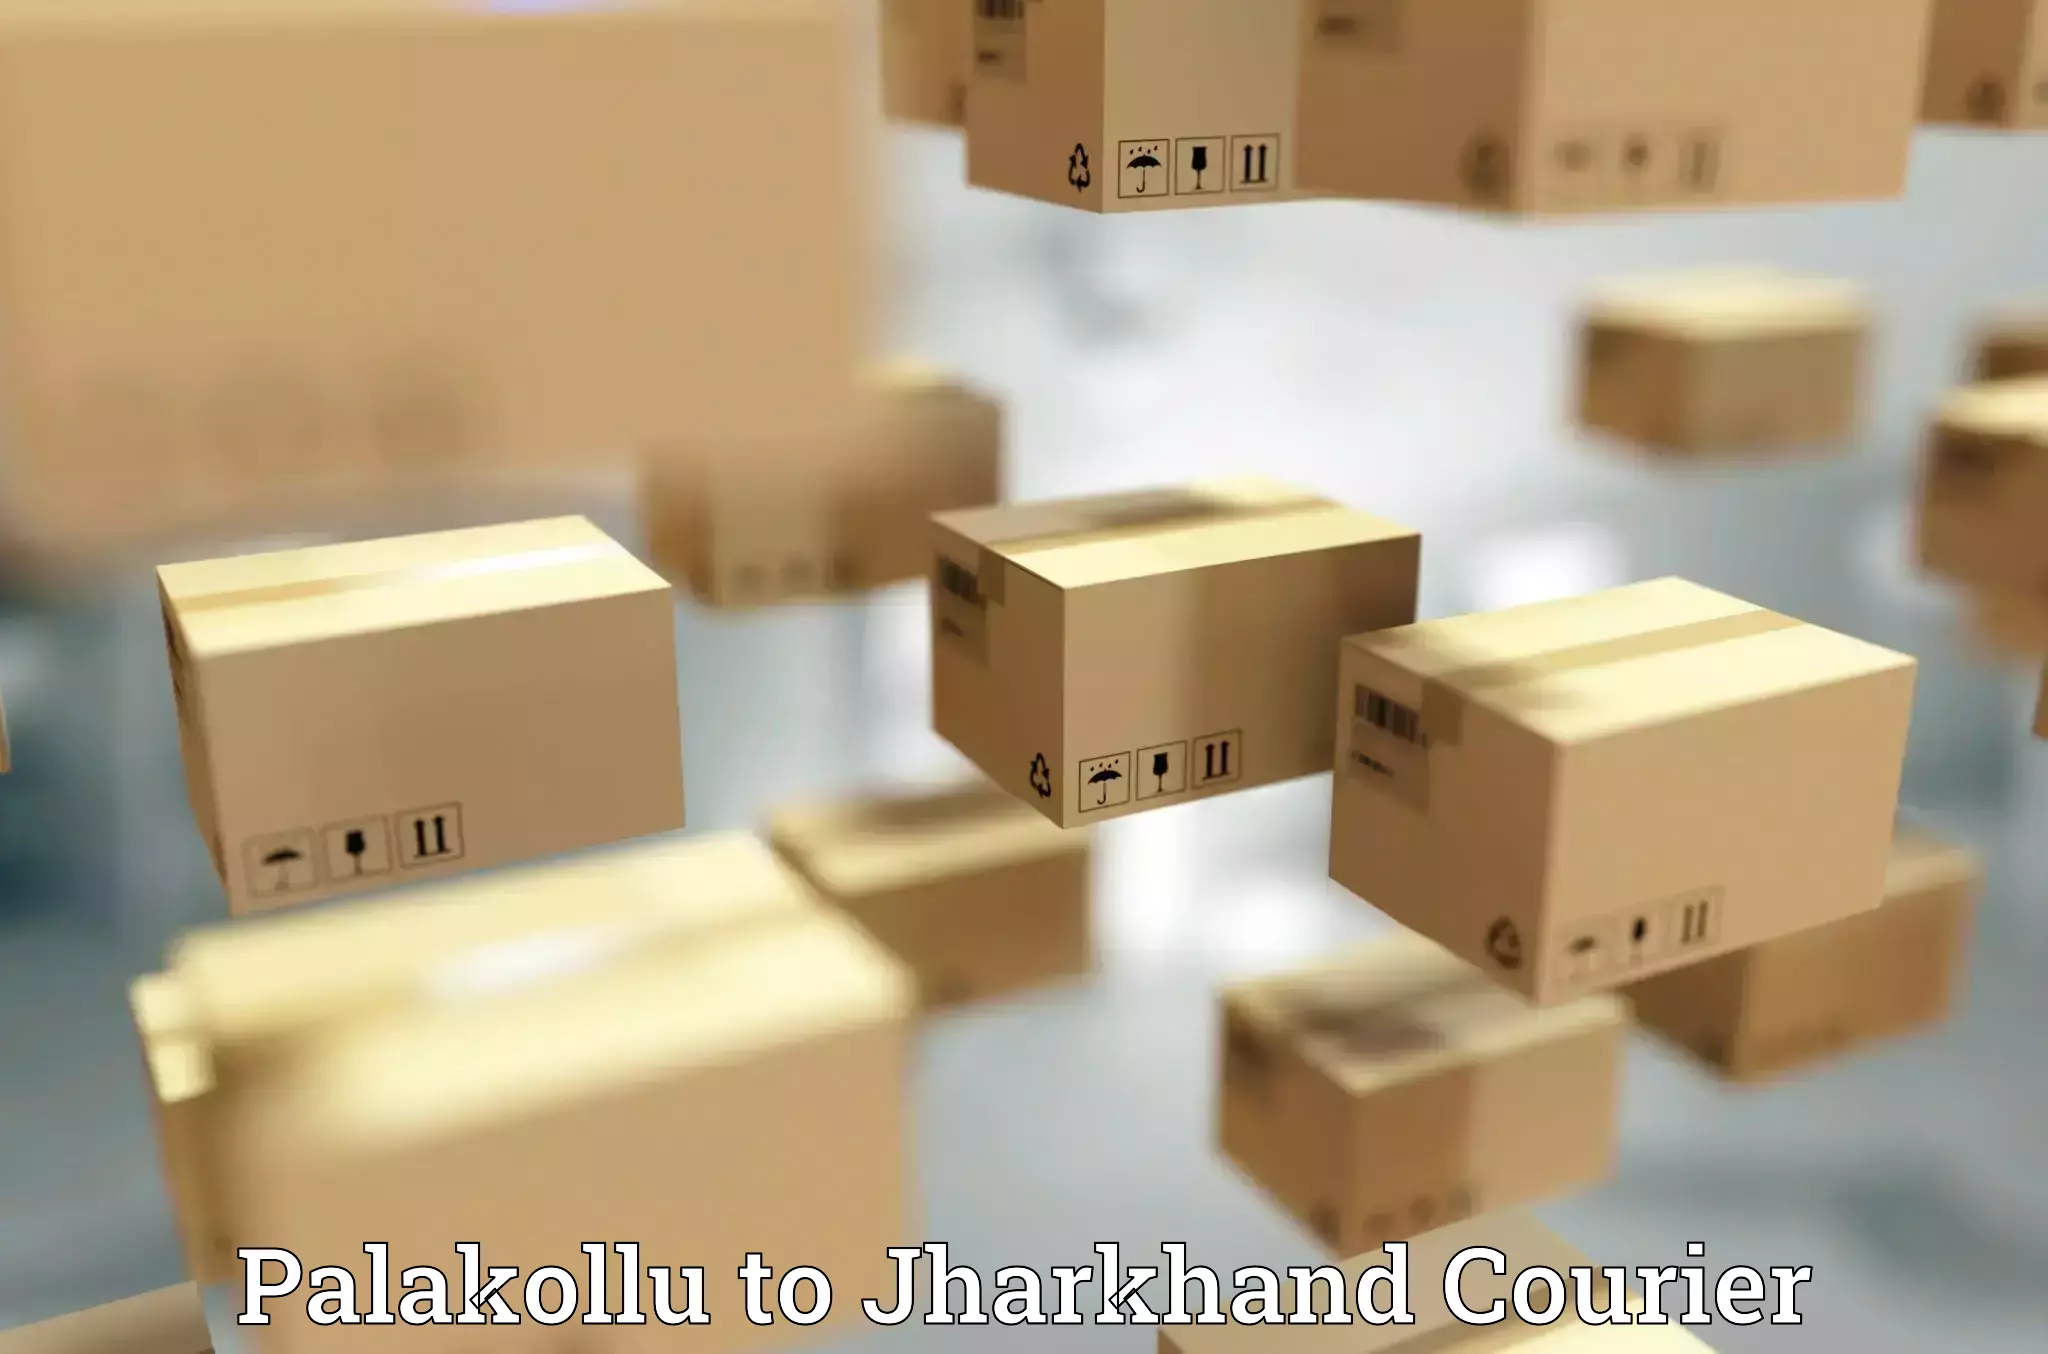 State-of-the-art courier technology Palakollu to Hazaribagh